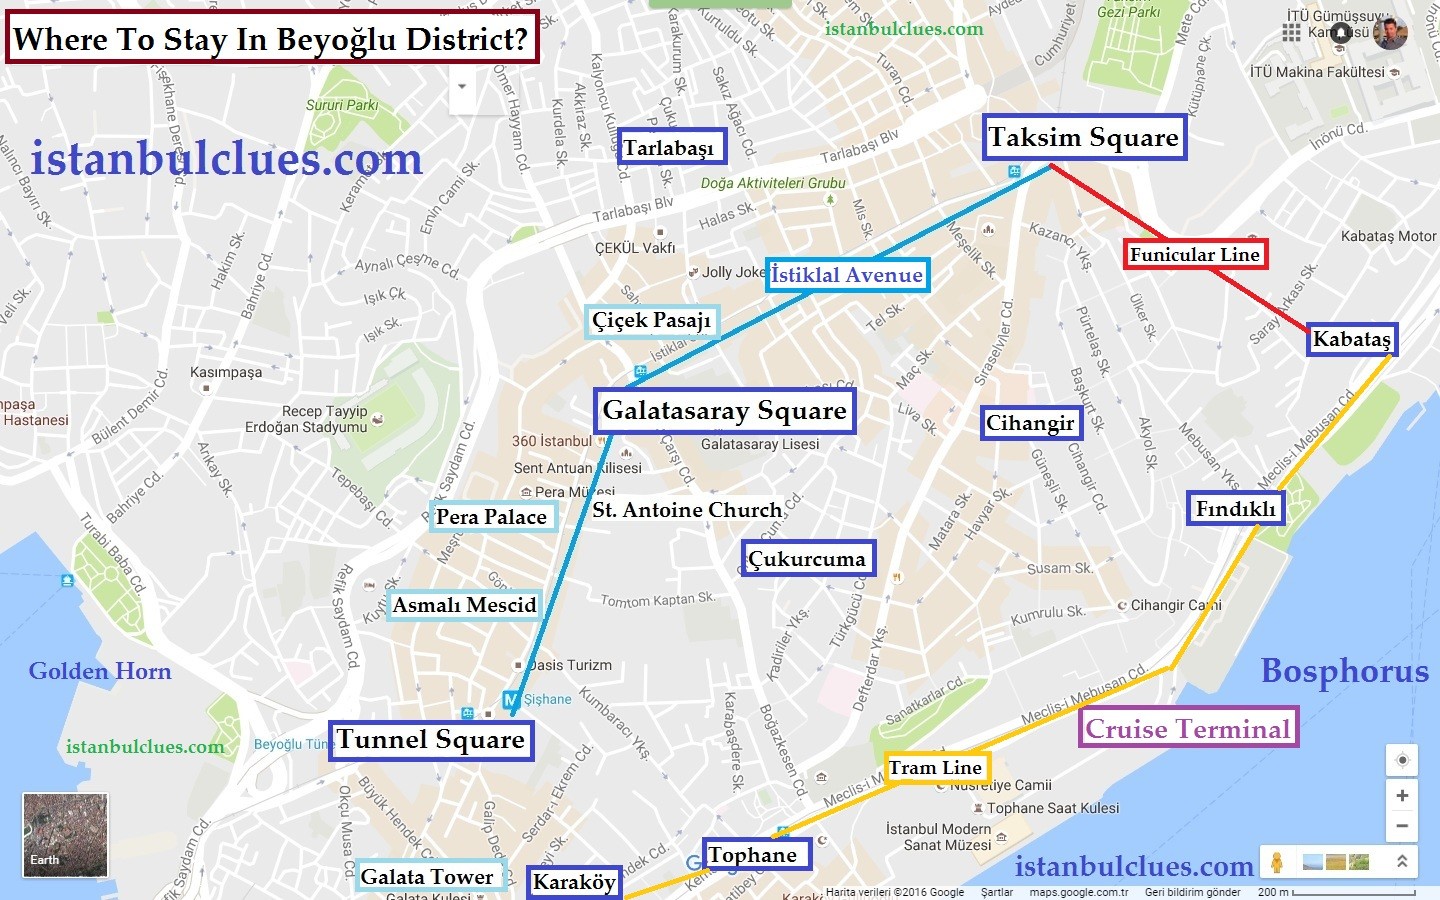 Where To Stay In Istanbul Beyoğlu And Taksim Map 